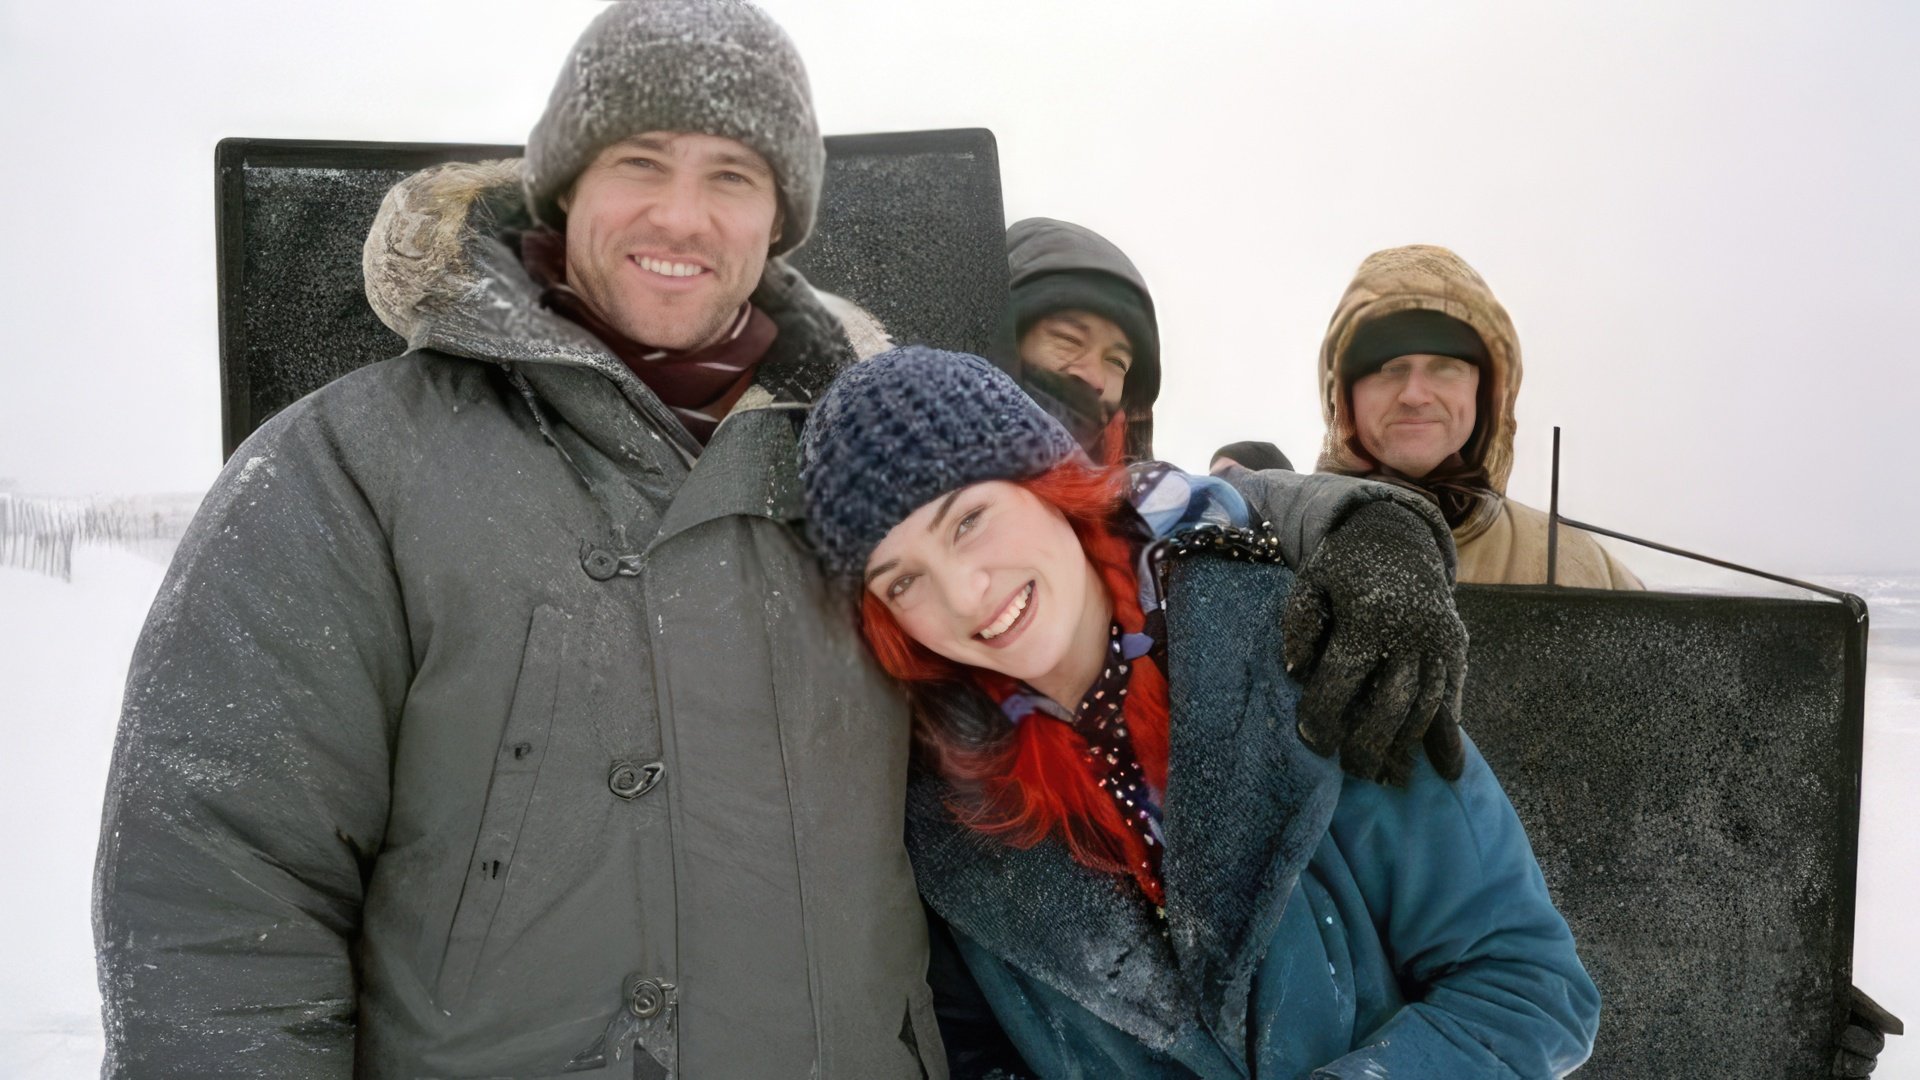 Kate Winslet and Jim Carrey on the set of the movie 'Eternal Sunshine of the Spotless Mind'